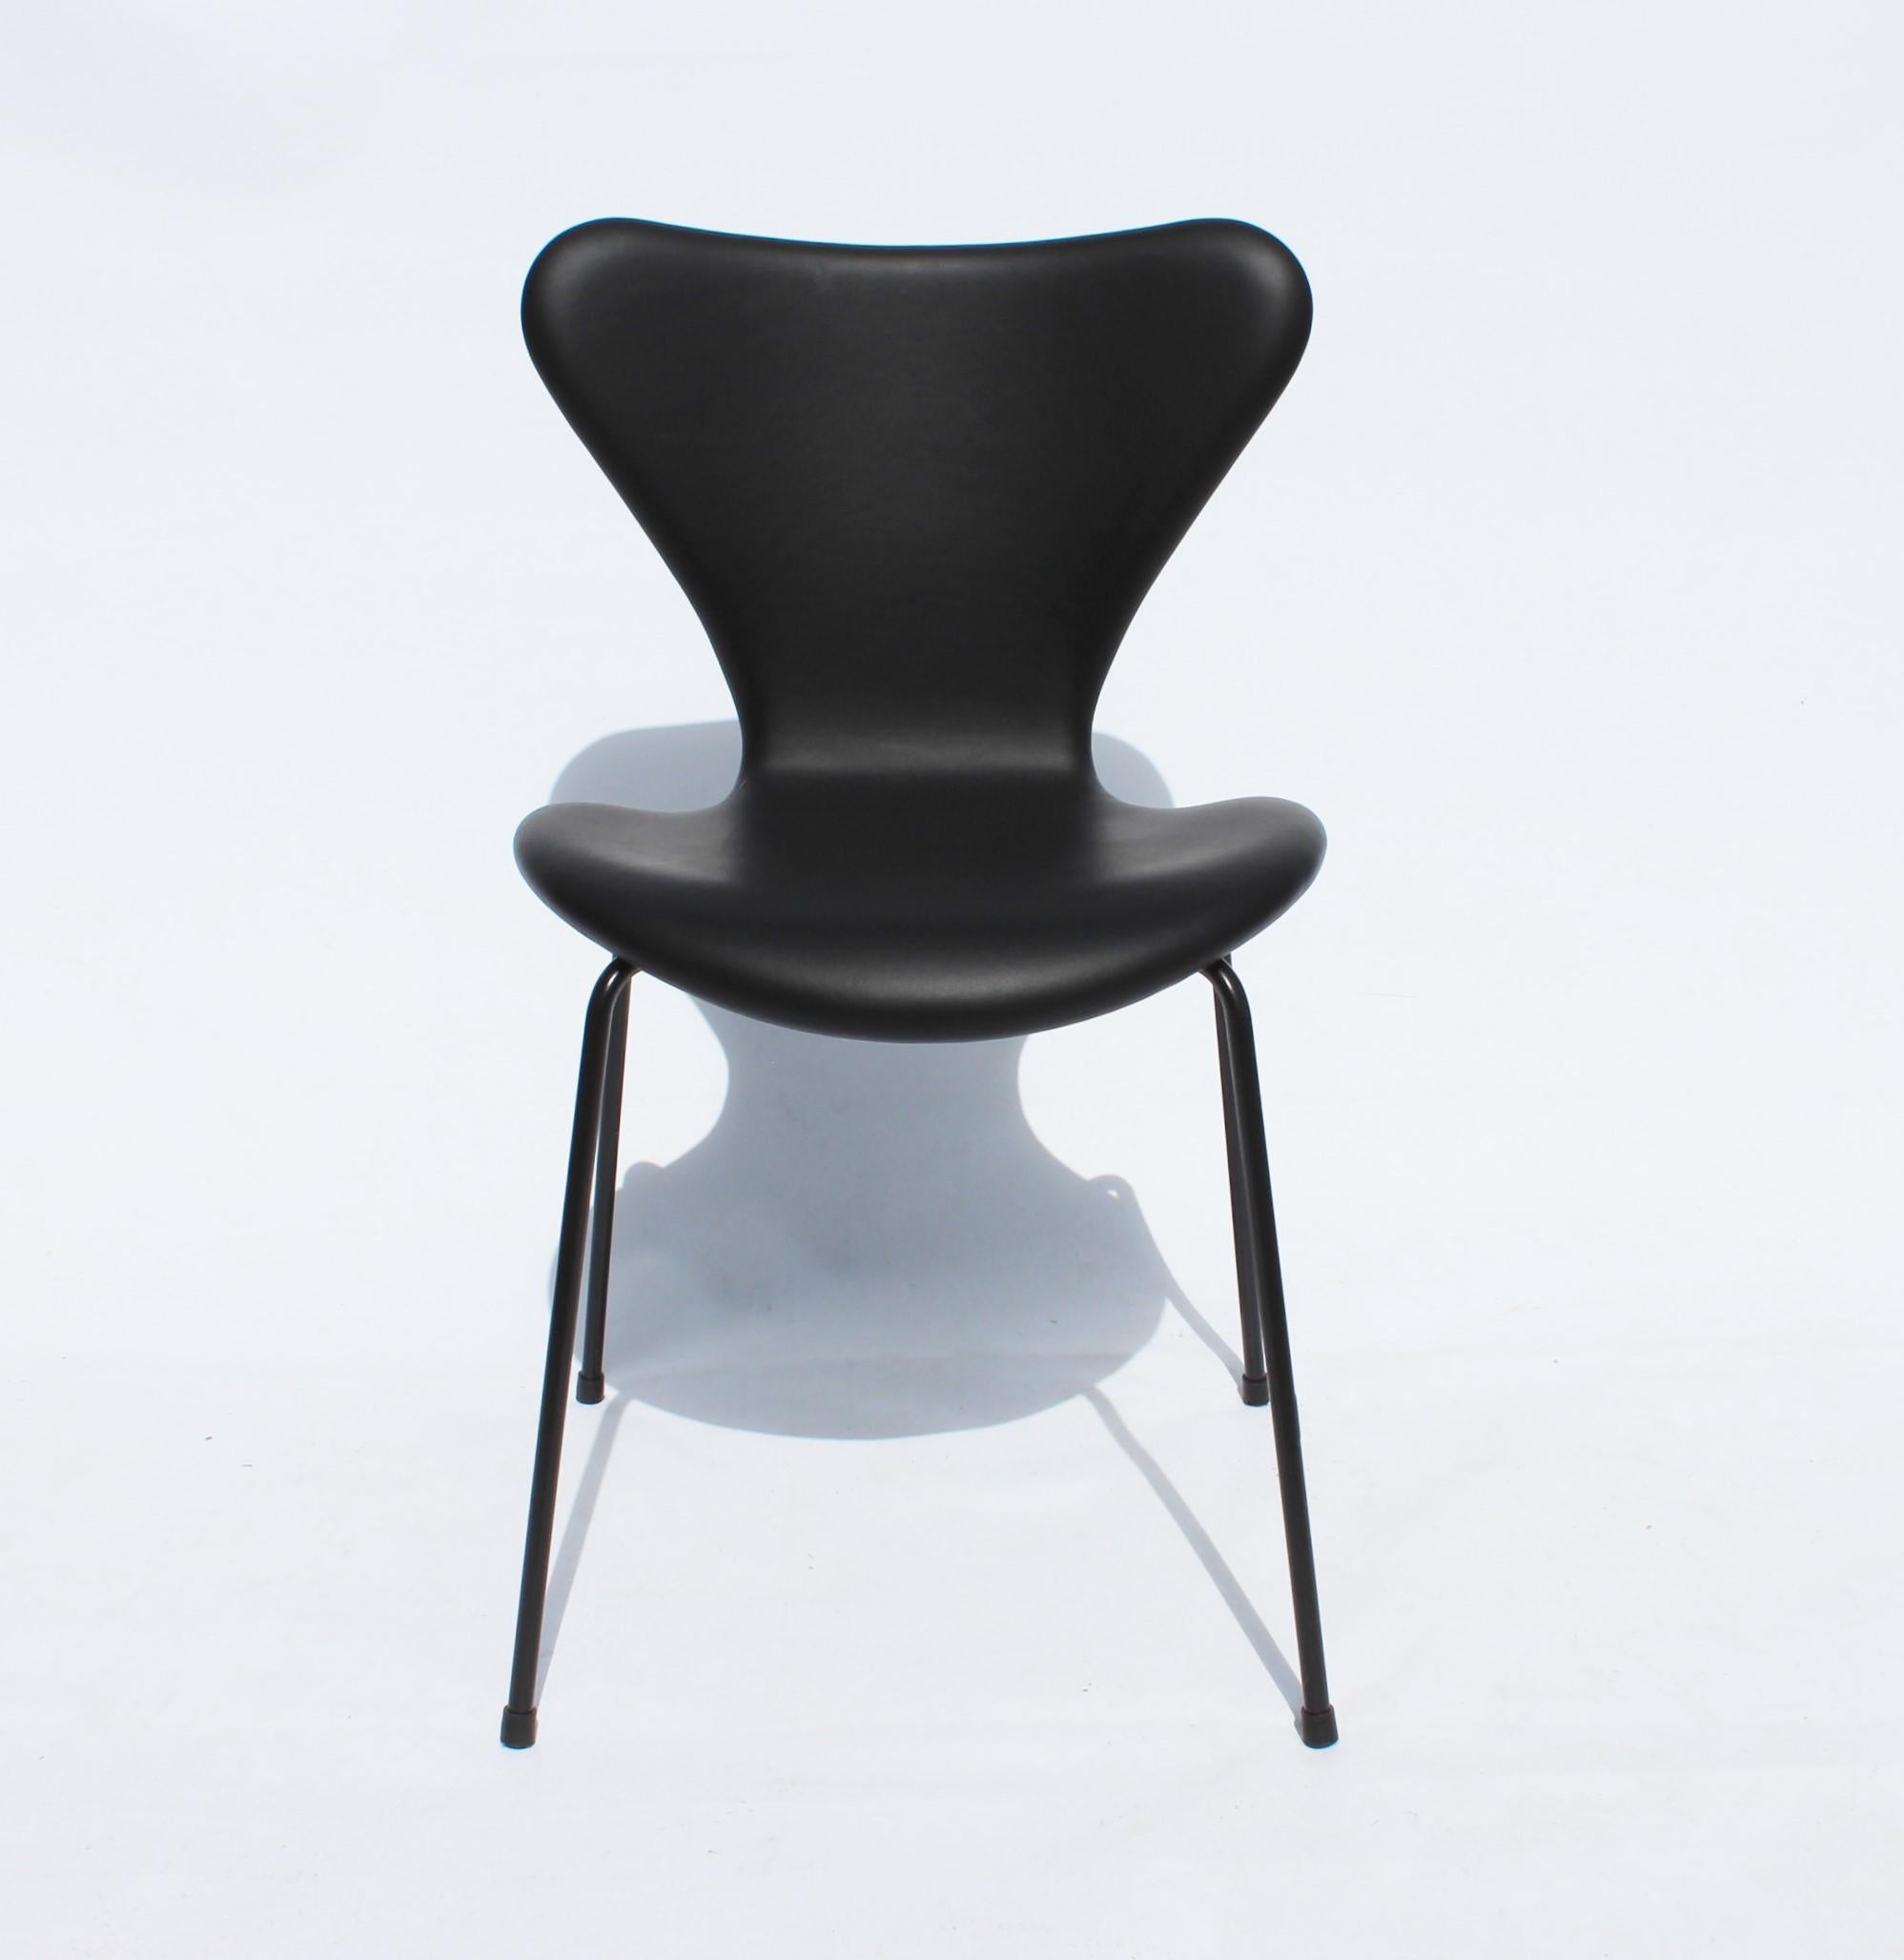 Set of three series seven chairs, model 3107, designed by Arne Jacobsen and manufactured by Fritz Hansen I 2016. The chairs are a special model with original upholstery of black leather and black frame.
 